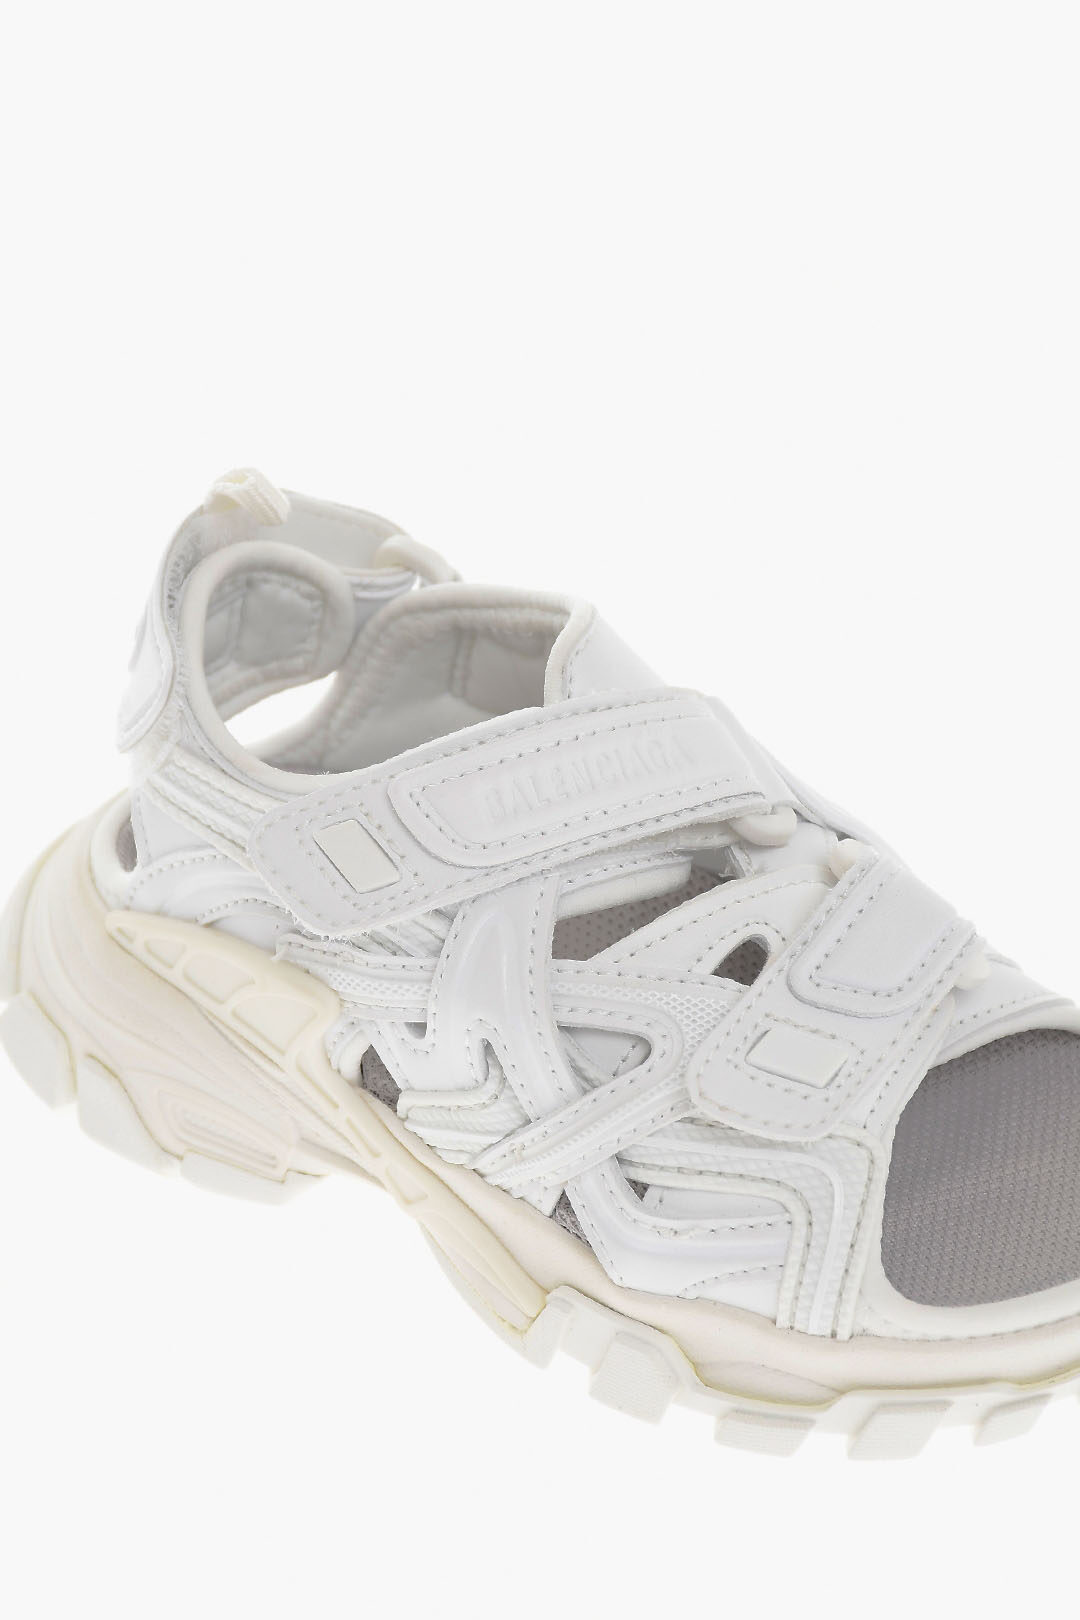 Balenciaga KIDS TRACK Sandals with Cut-out Detailing and Velcro ...